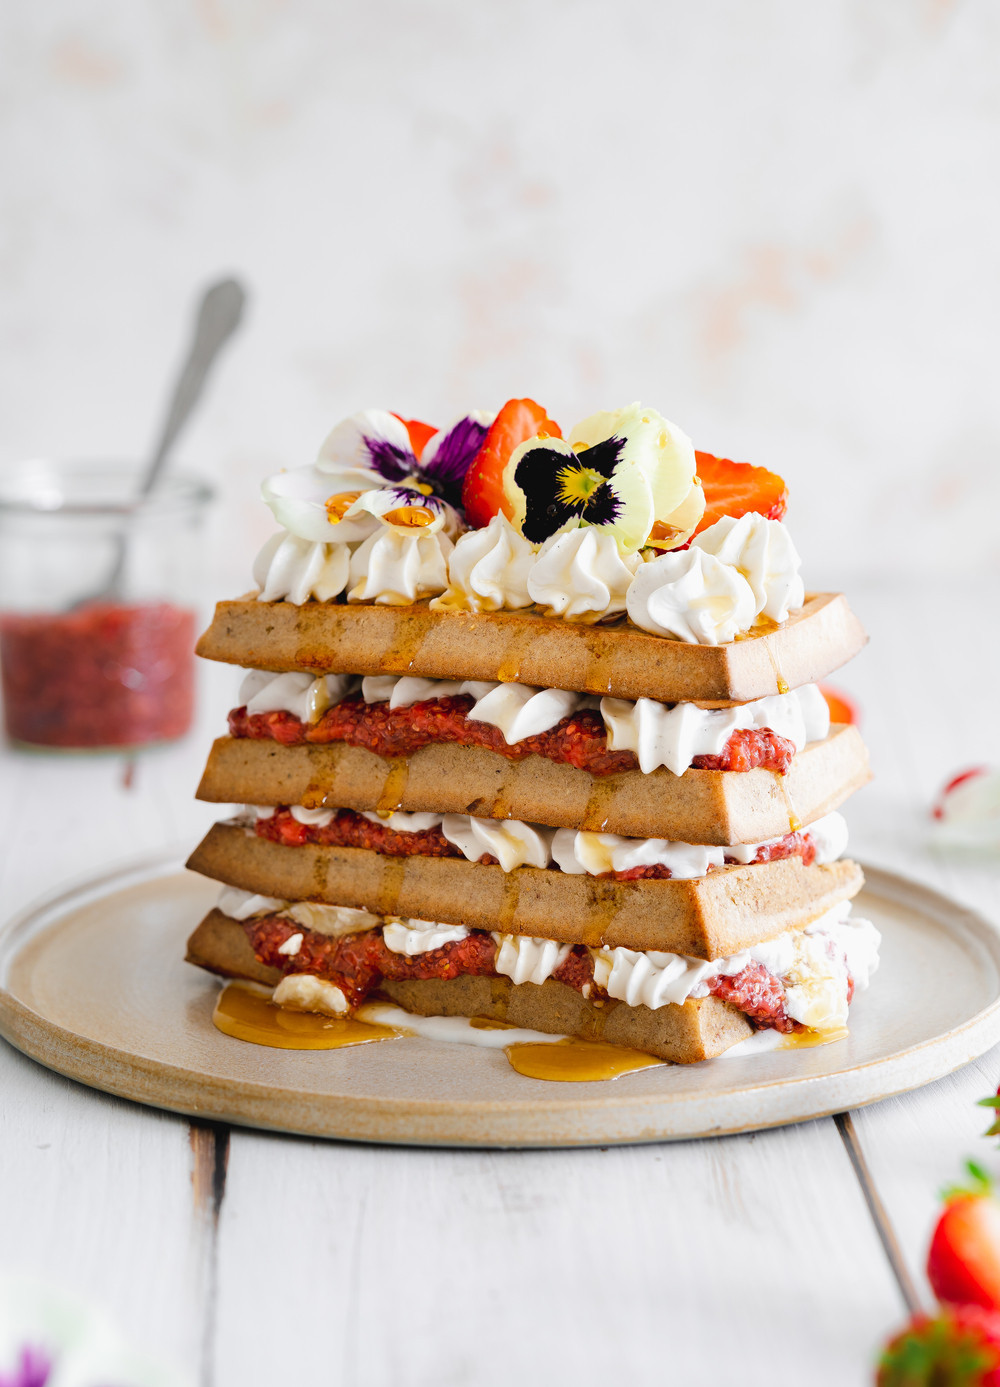 Baked Waffles with Strawberries and Cream